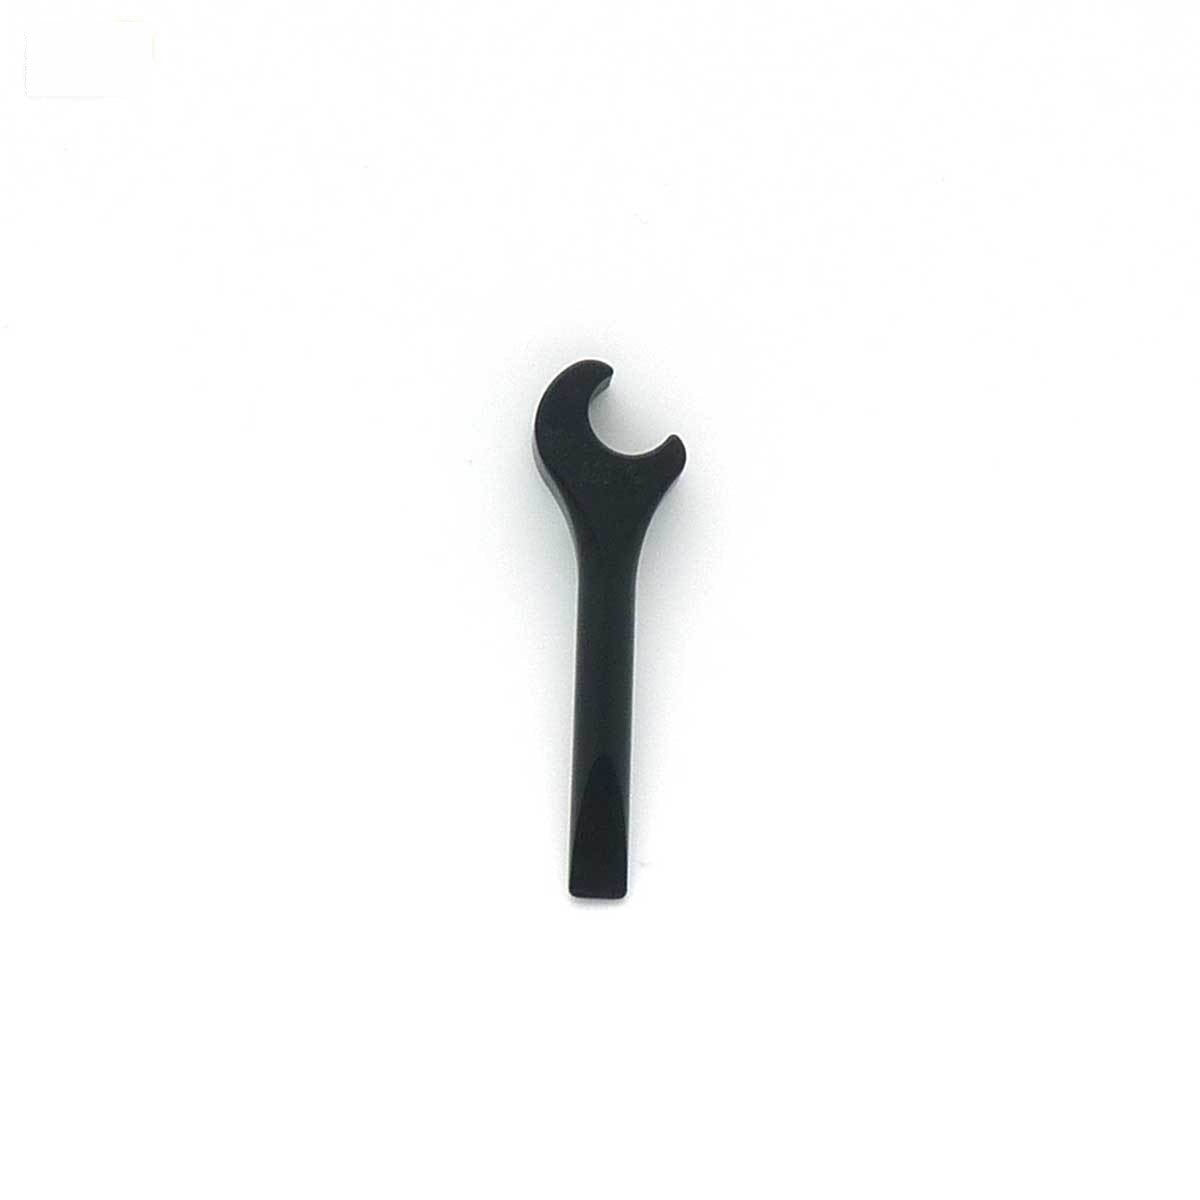 LEGO Spanner / Wrench - Minifigure Accessory –